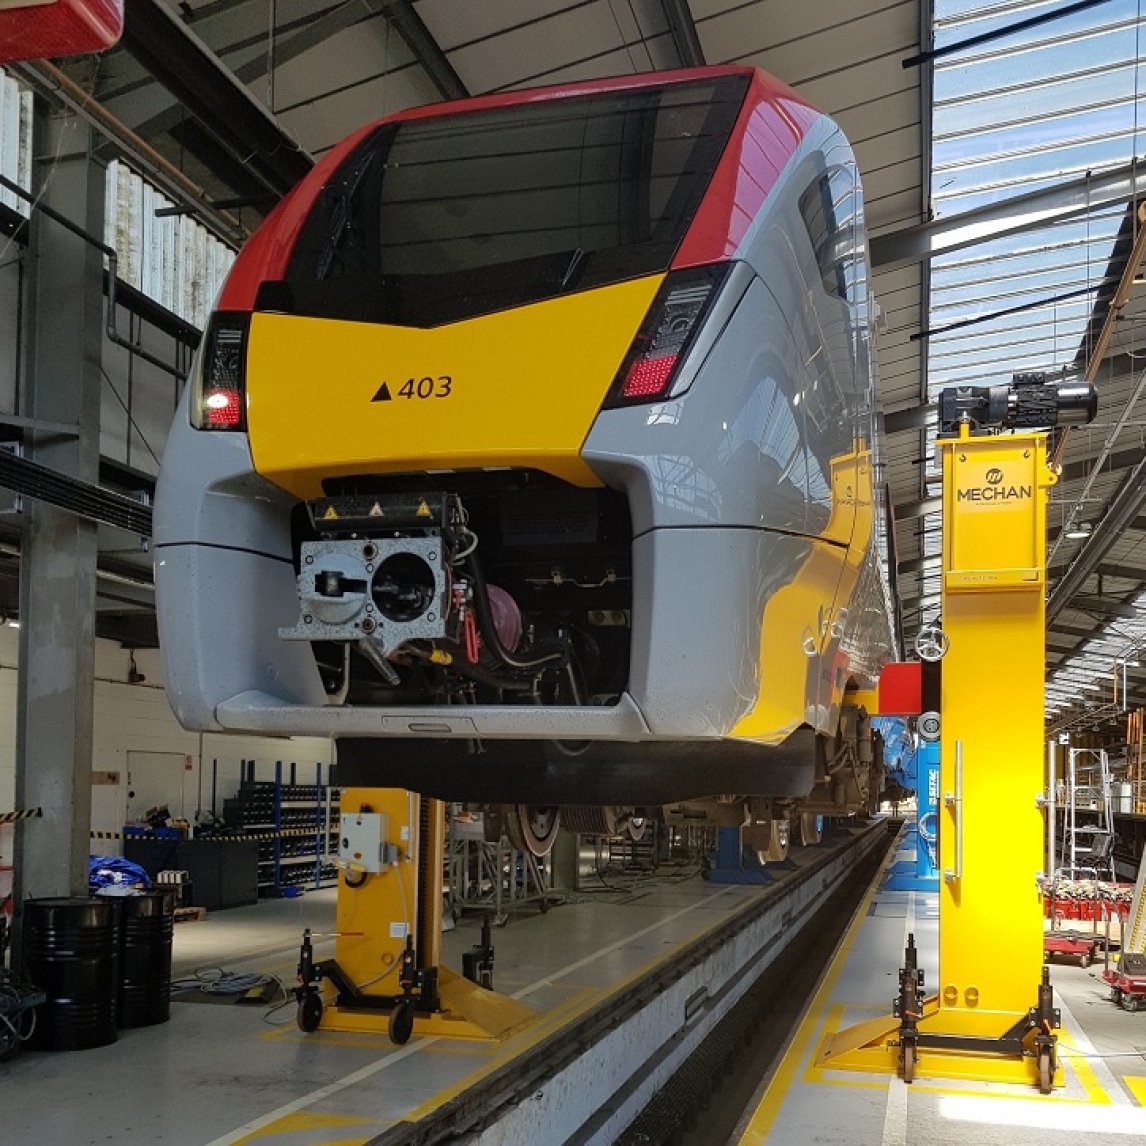 Clacton train lifting facility being used to raise a Stadler train off the ground